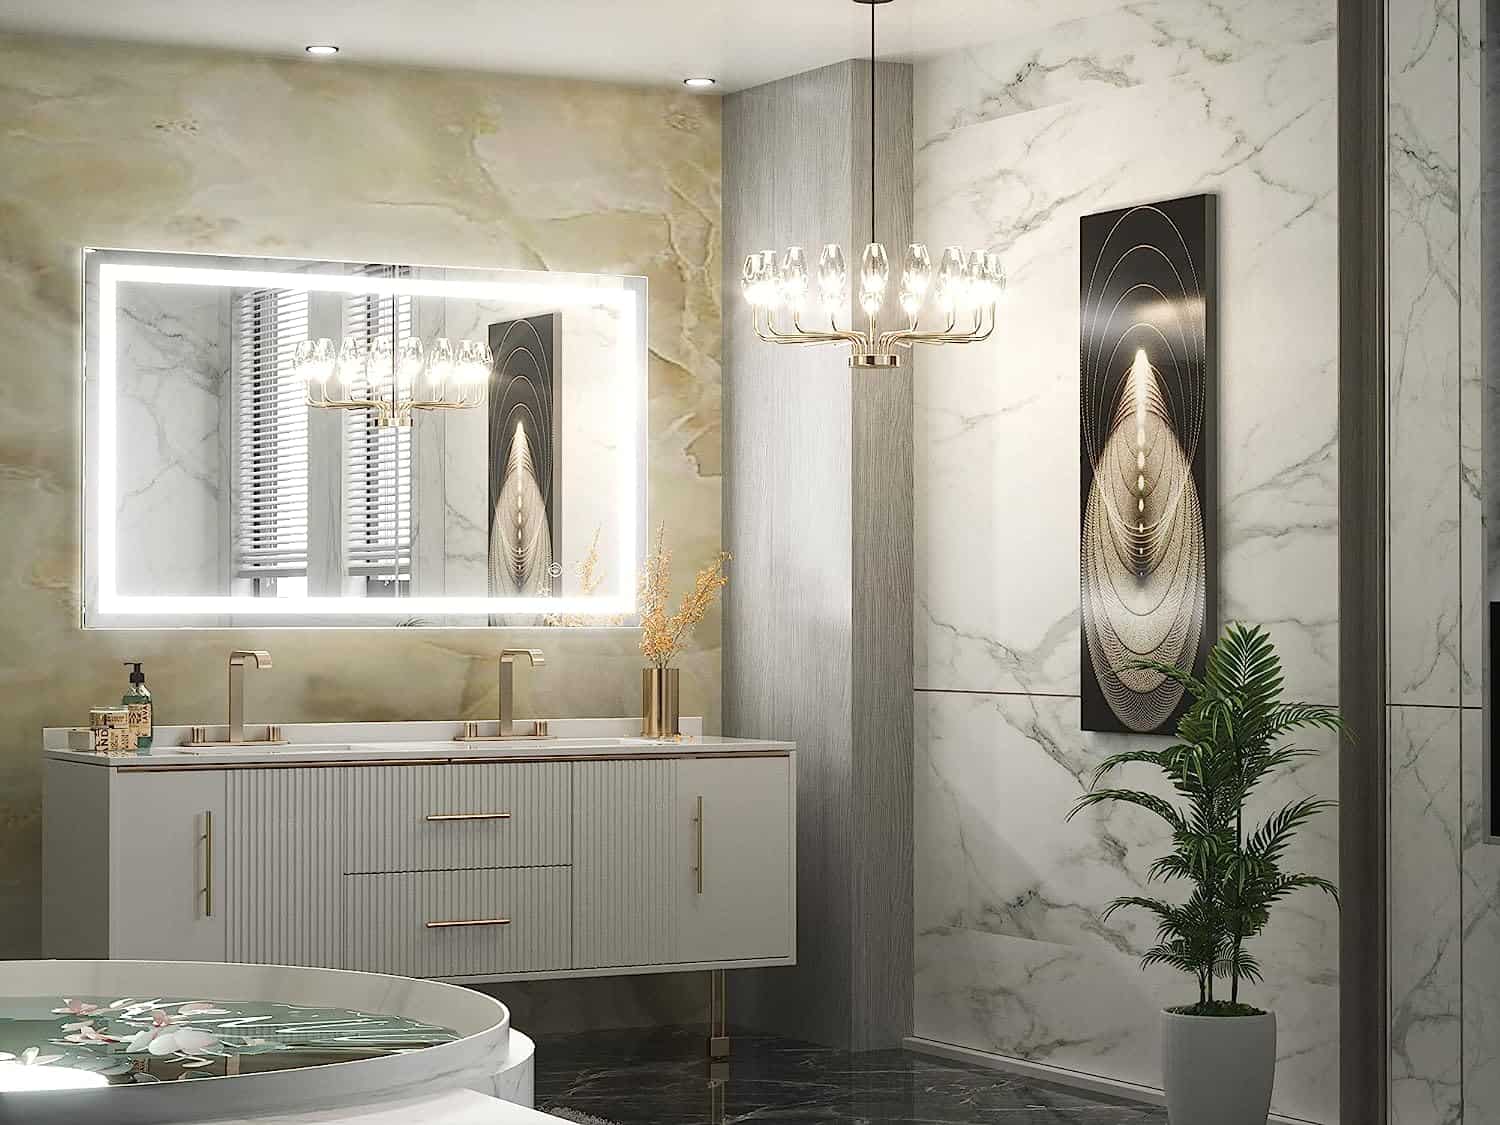 Luxurious bathroom with marble walls and floor, featuring a vanity with double sinks, an LED Mirror with Lights 40 x 24″ Bathroom Vanity Mirror Illuminated Mirror, and ornate decorative elements.